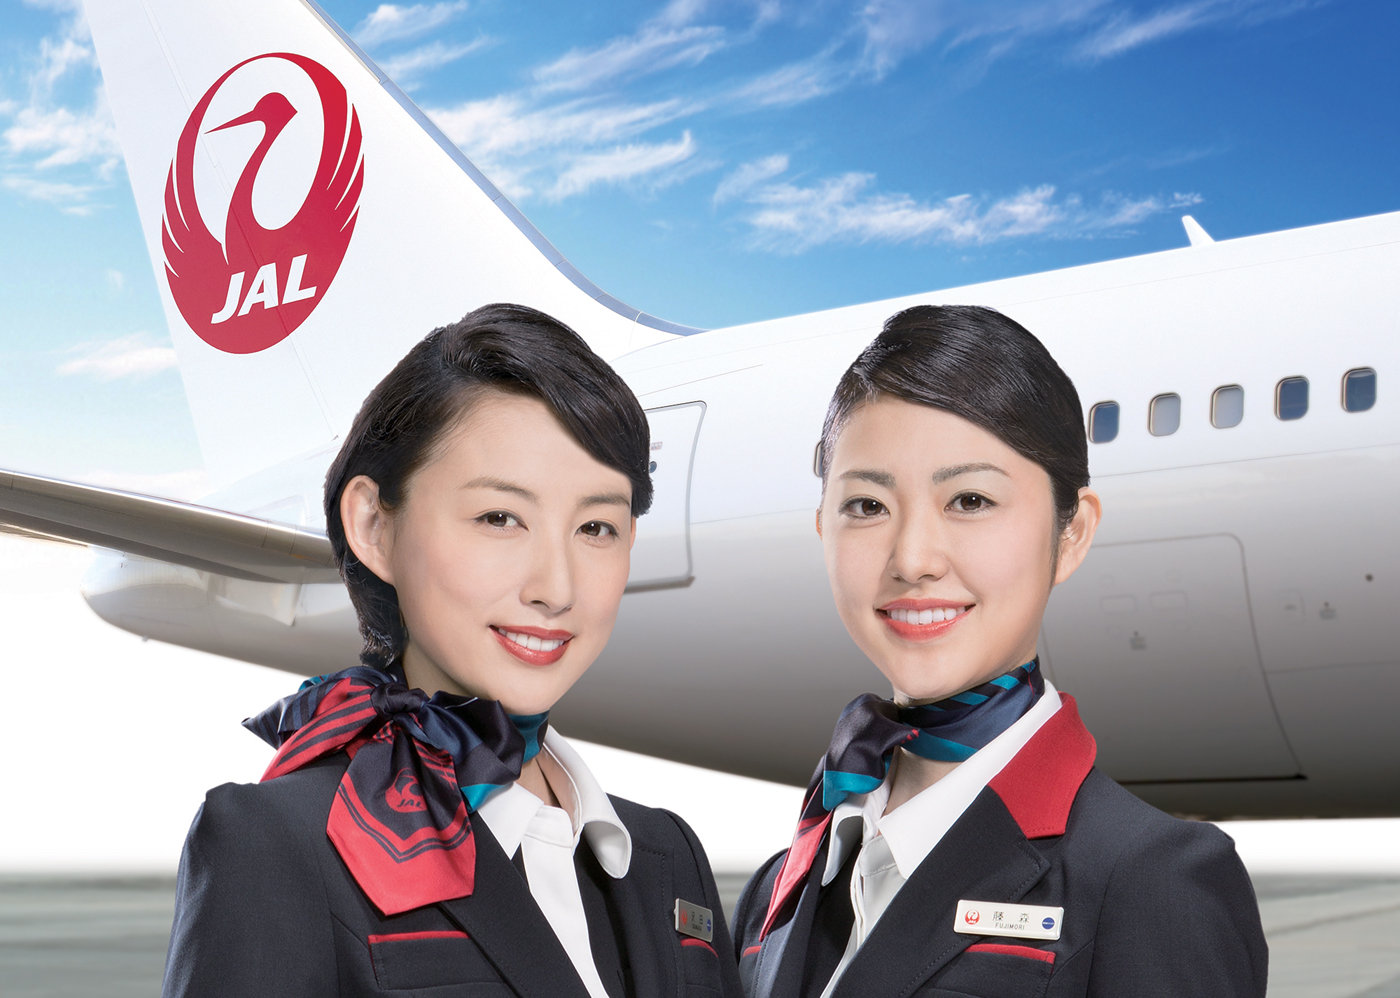 Japan Airlines is certified as a 5Star Airline Skytrax